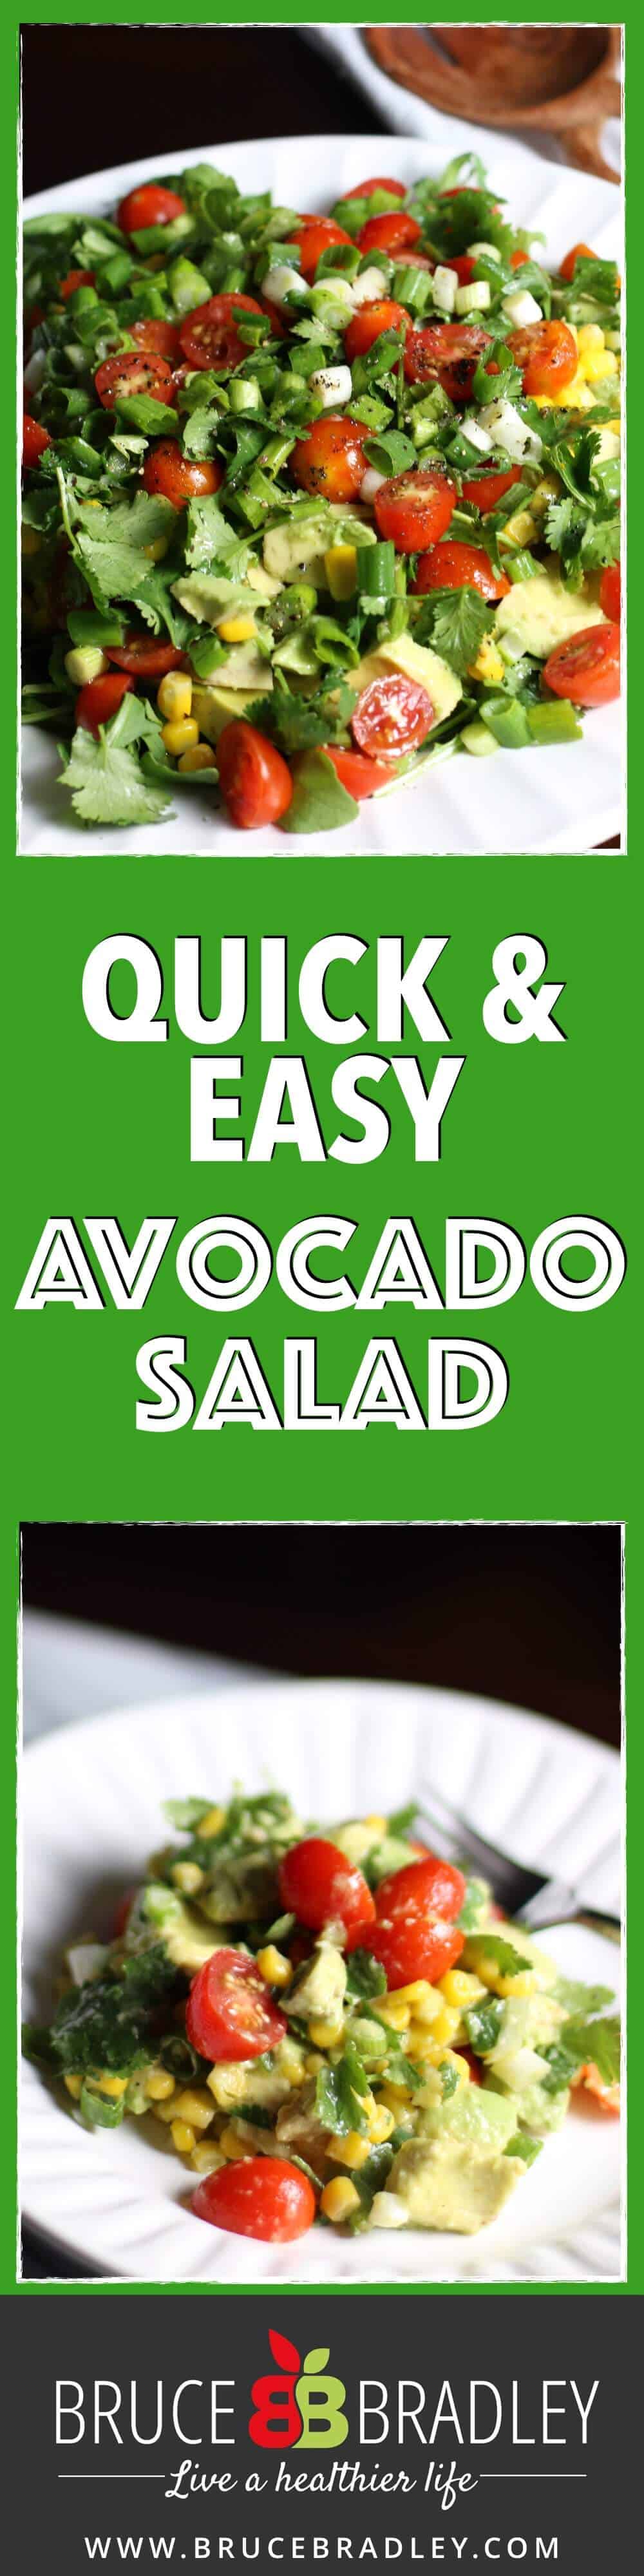 This Avocado Salad Is A Delicious, Easy Way To Eat More Vegetables. Made With Avocados, Corn, Cherry Tomatoes, Green Onions, Cilantro, Lime Juice And Olive Oil, This Avocado Salad Really Is An Amazing Taste Treat!